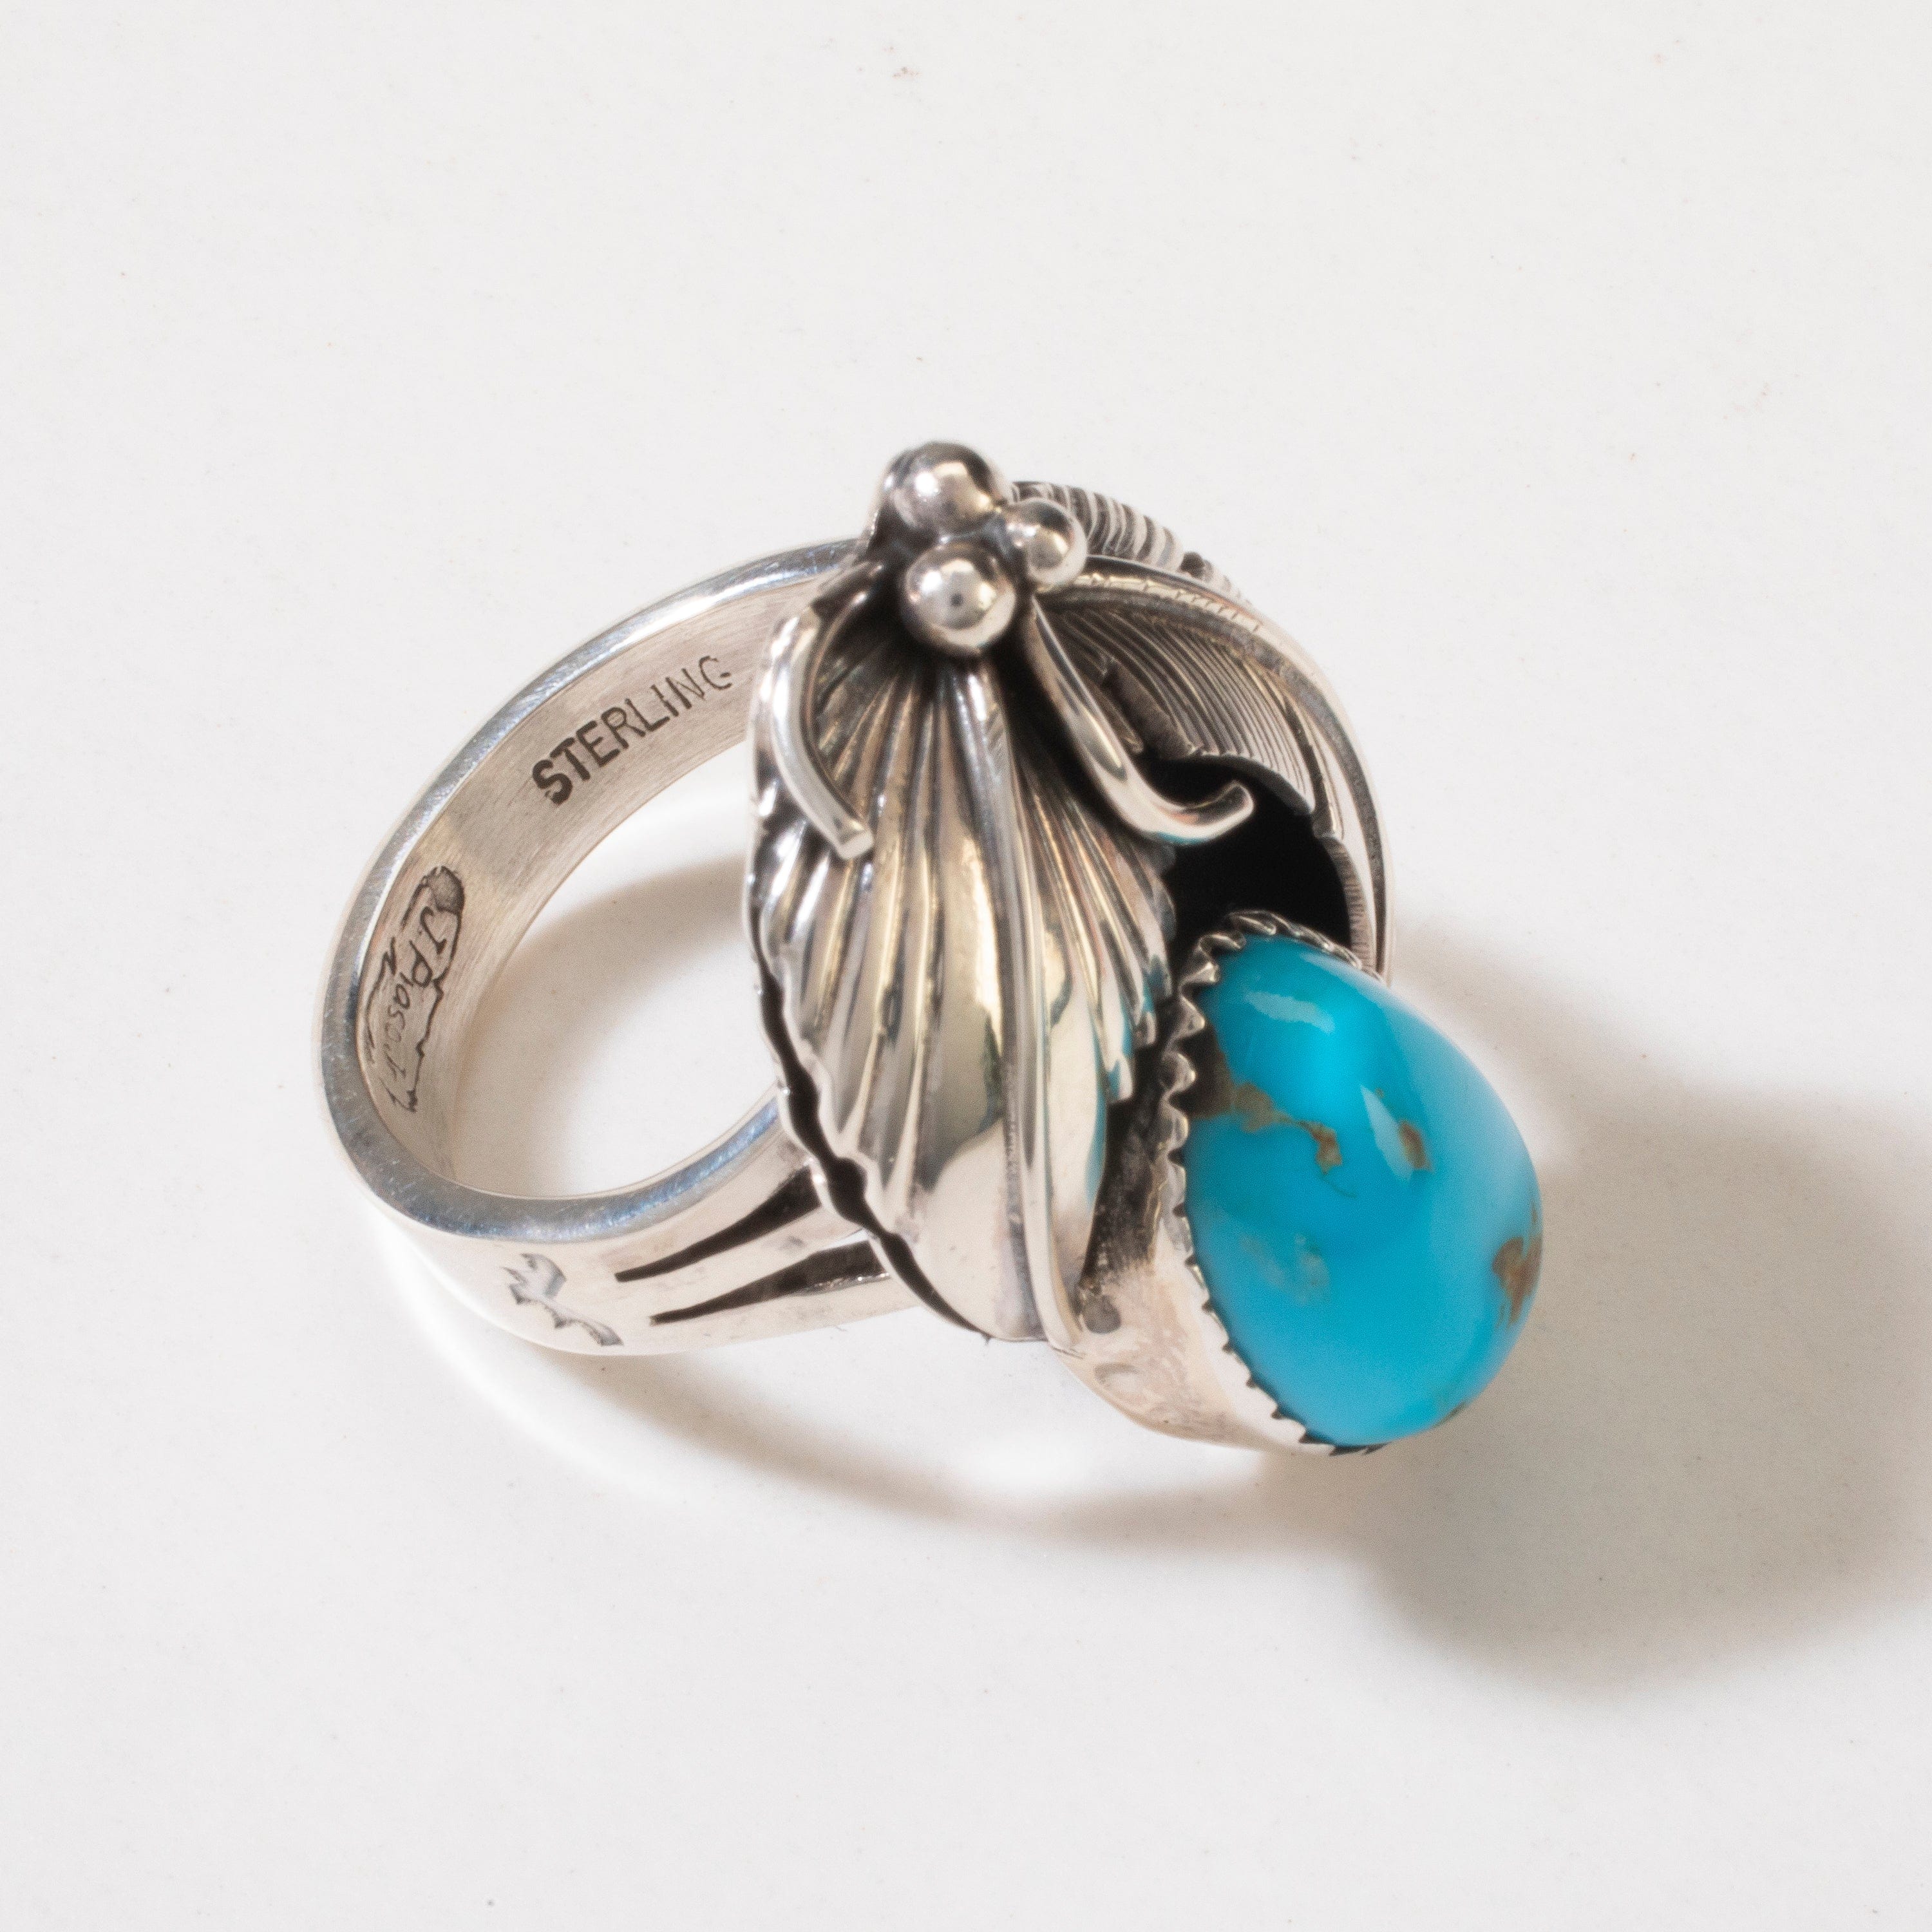 Kalifano Native American Jewelry 9 Joe Piaso Jr. Sleeping Beauty Turquoise Feather Navajo USA Native American Made 925 Sterling Silver Ring NAR600.074.9